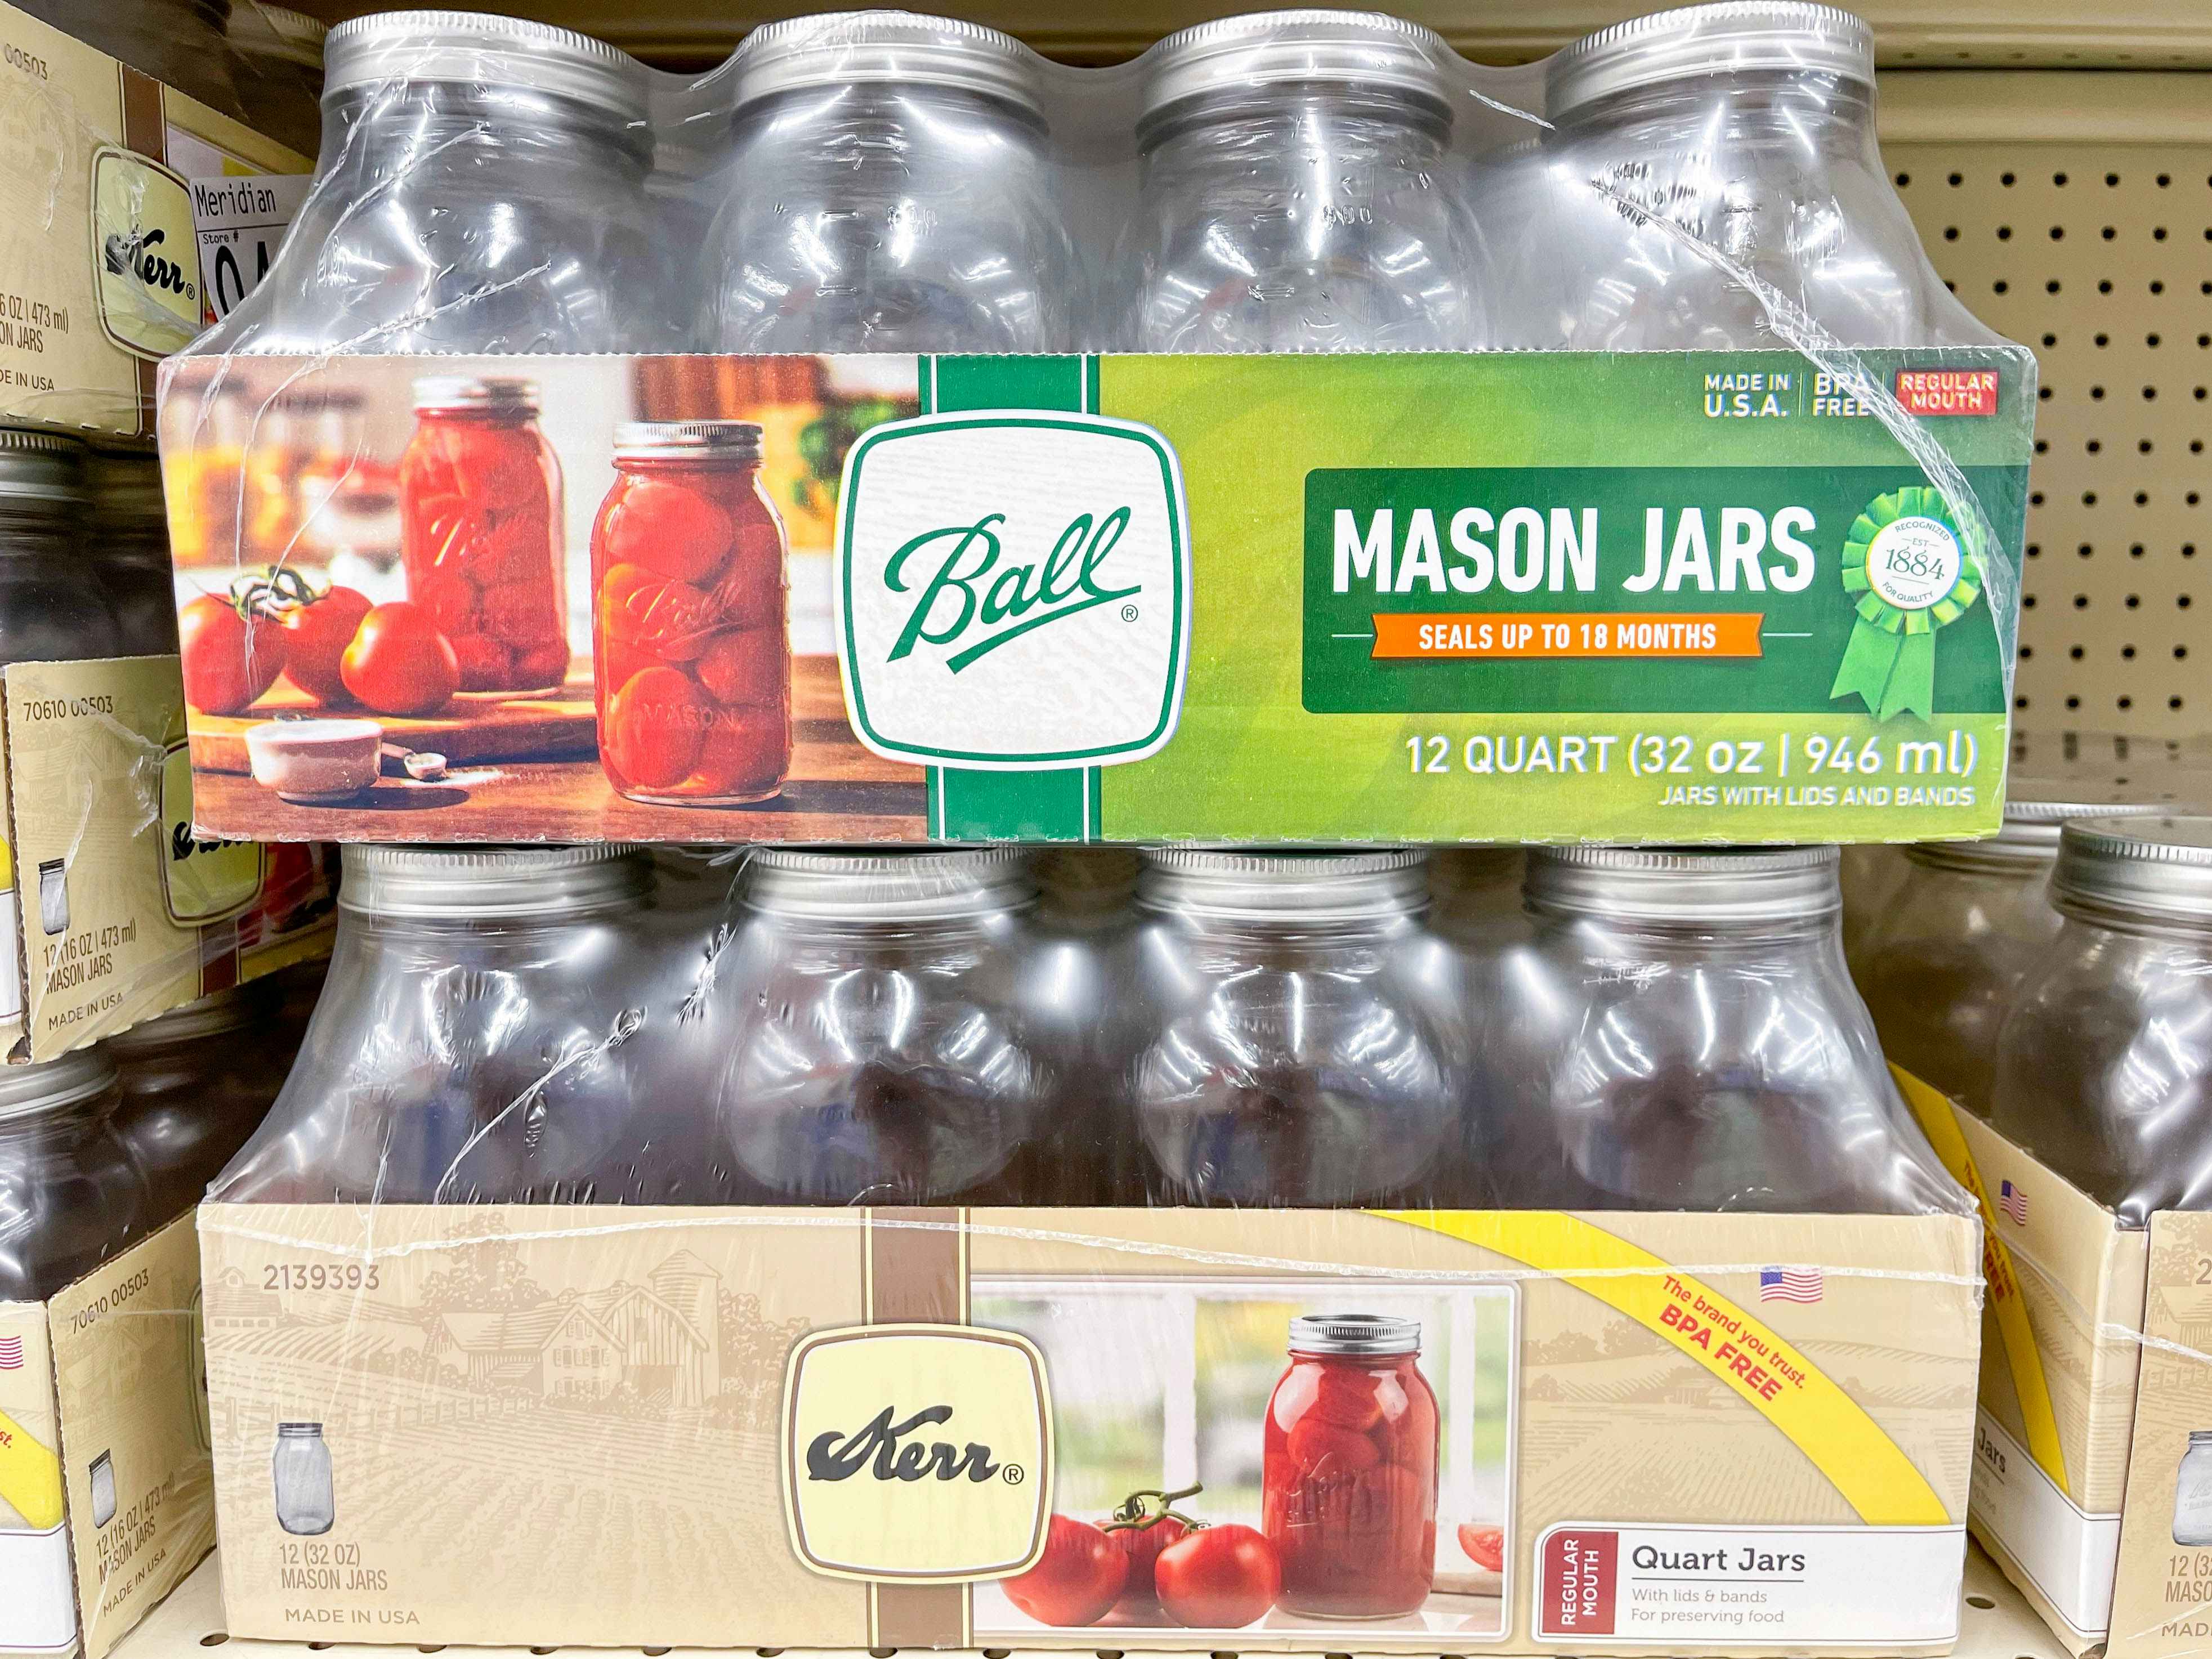 A case of 12 Ball canning jars on top of a case of 12 Kerr canning jars on a shelf in a store.